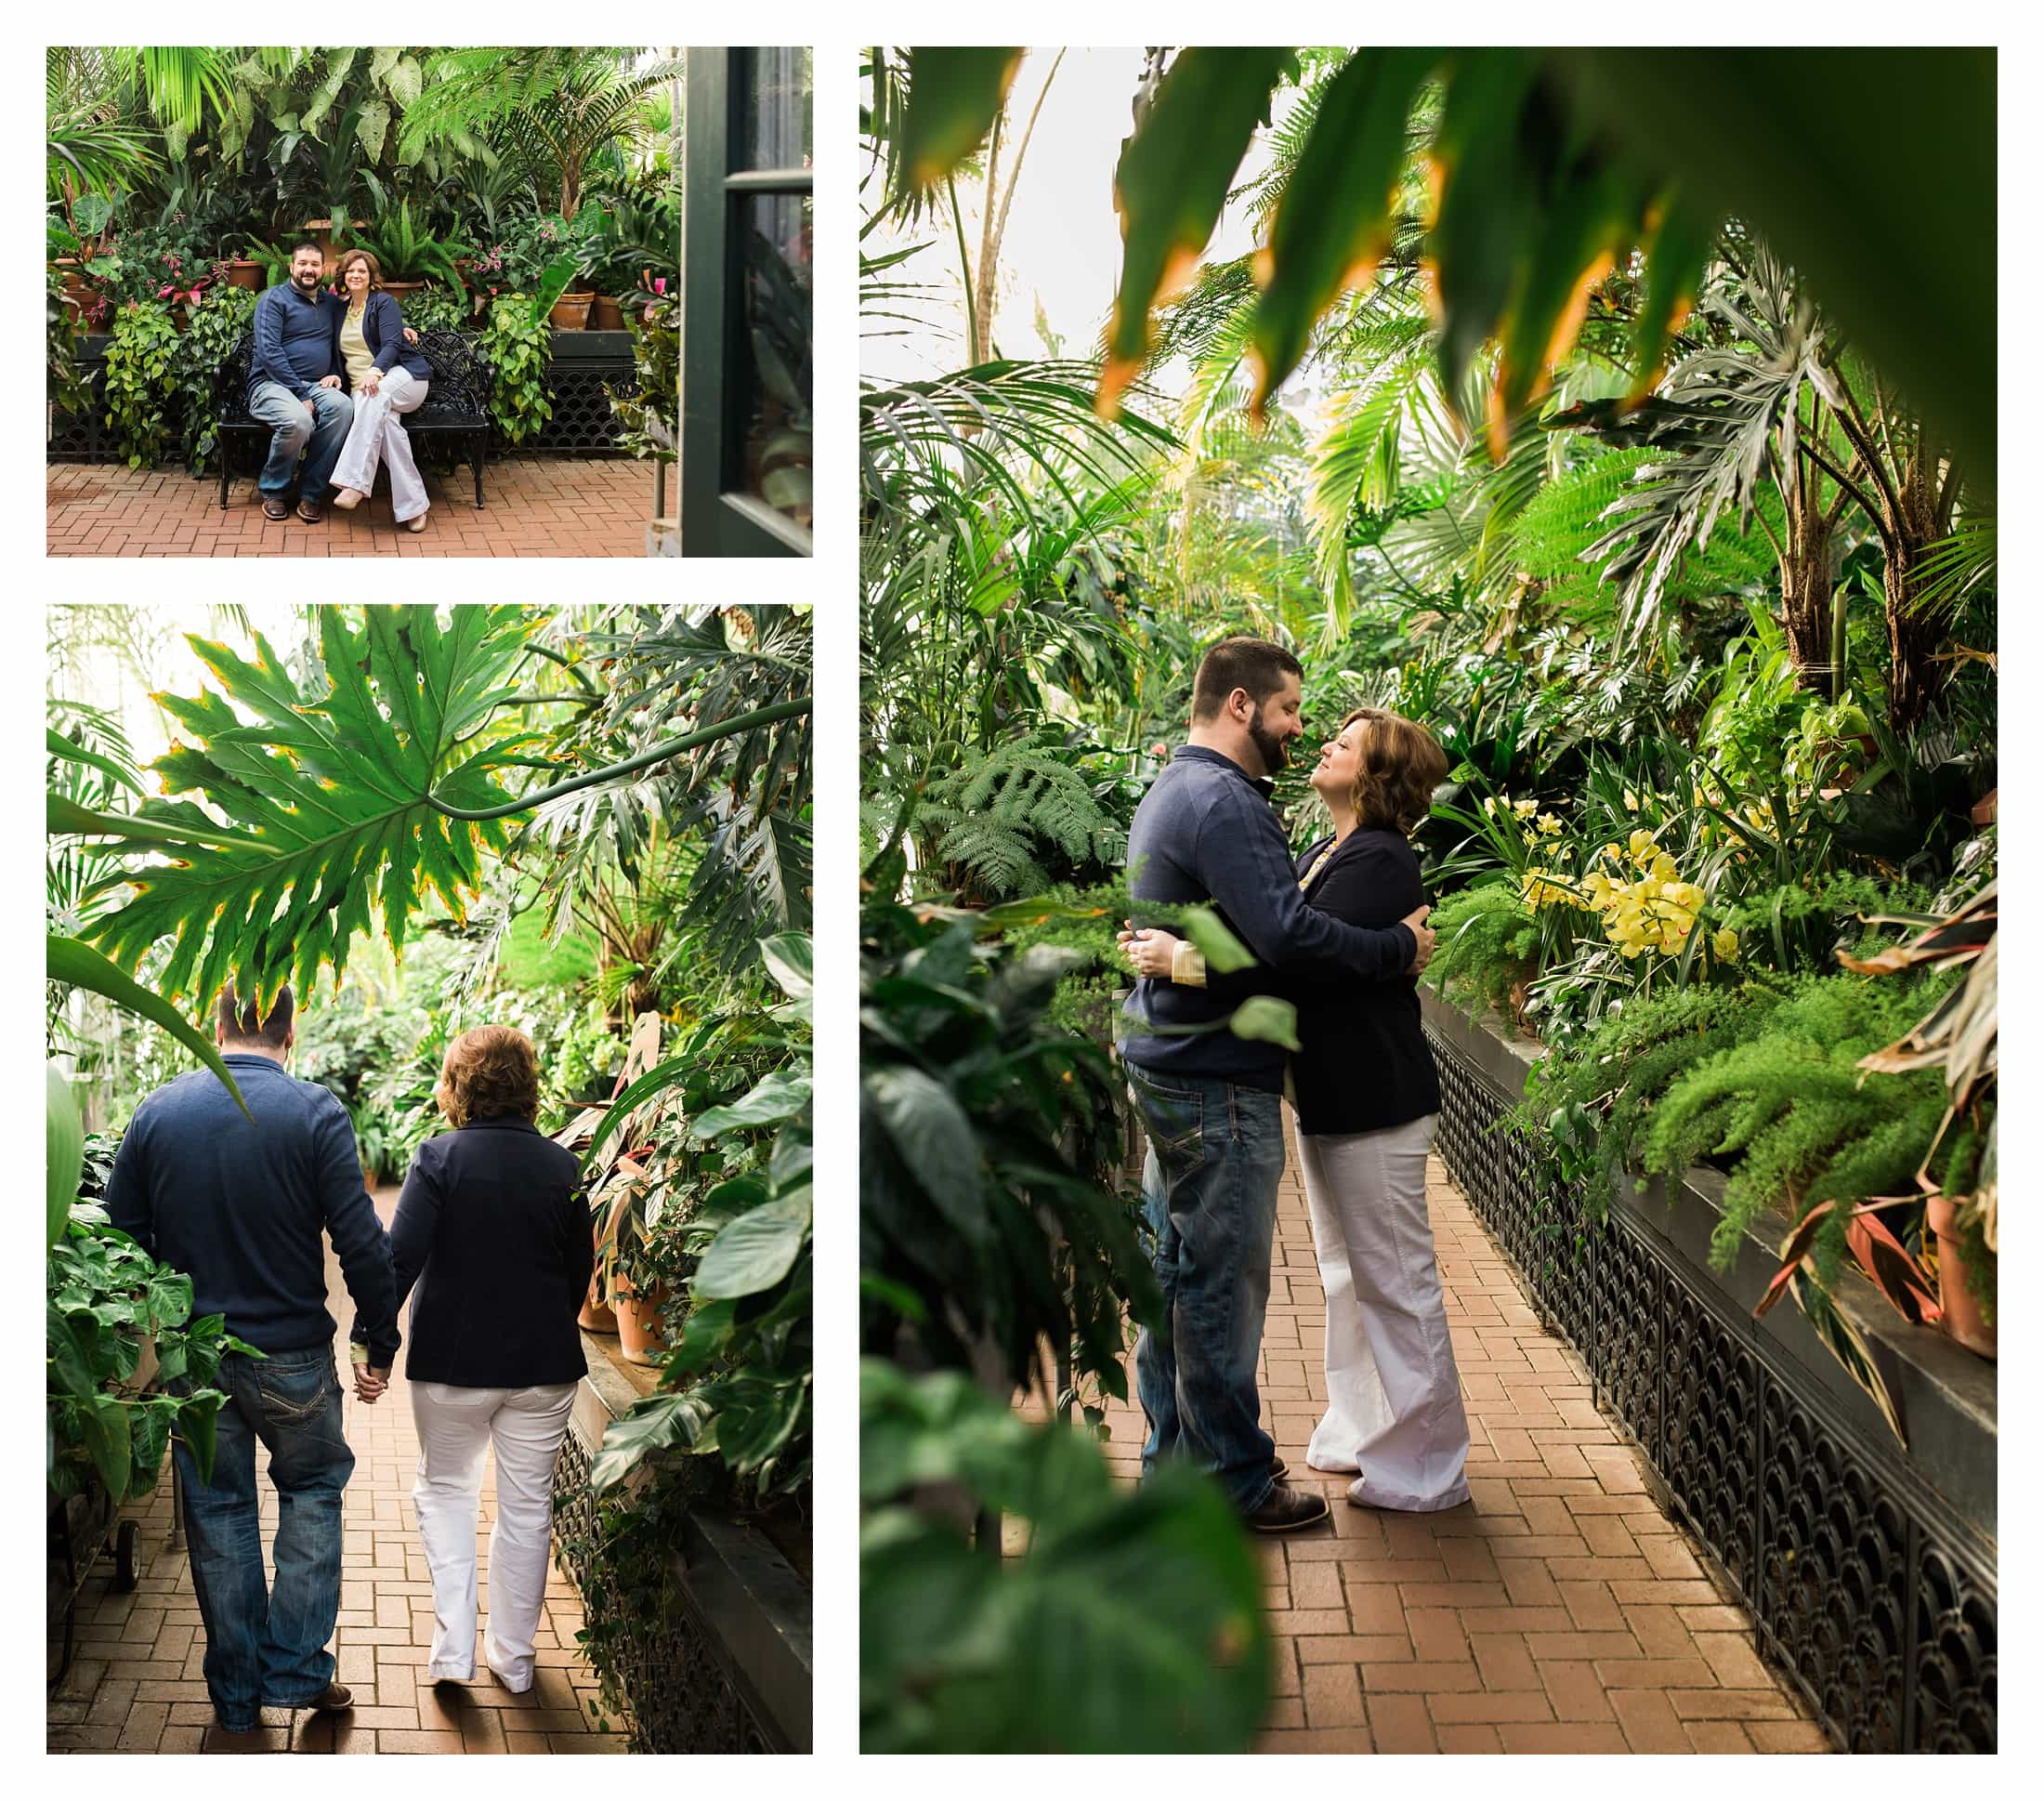 Couple in surrounded by plants in greenhouse at the Biltmore Estates.